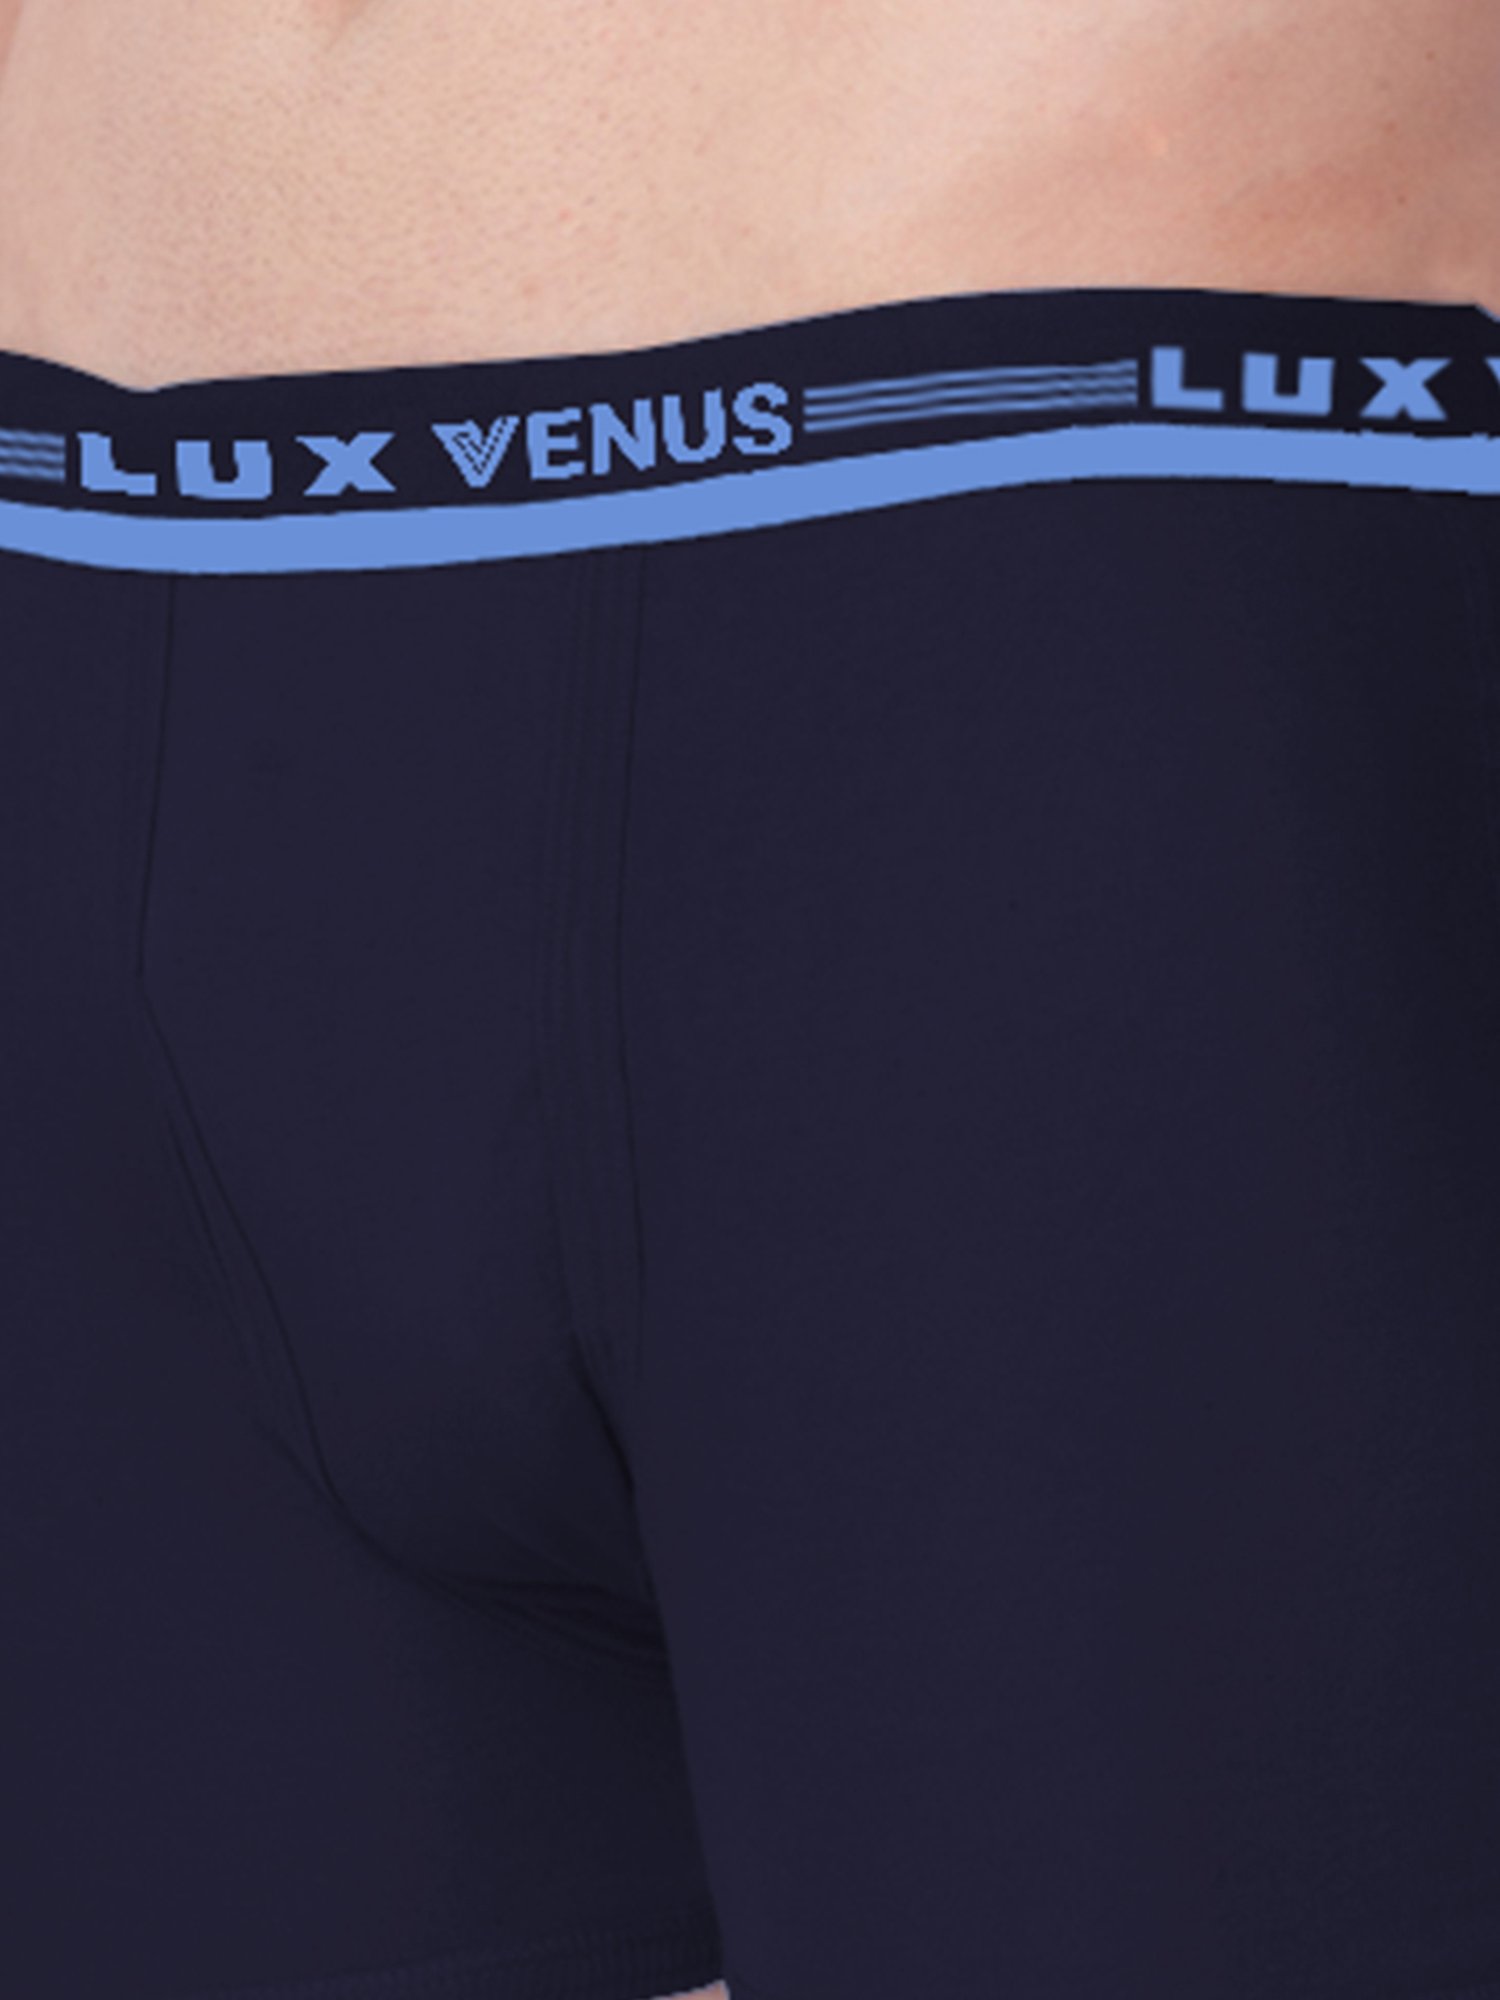 LUX VENUS Men Pack Of 4 Assorted Pure Cotton Trunks